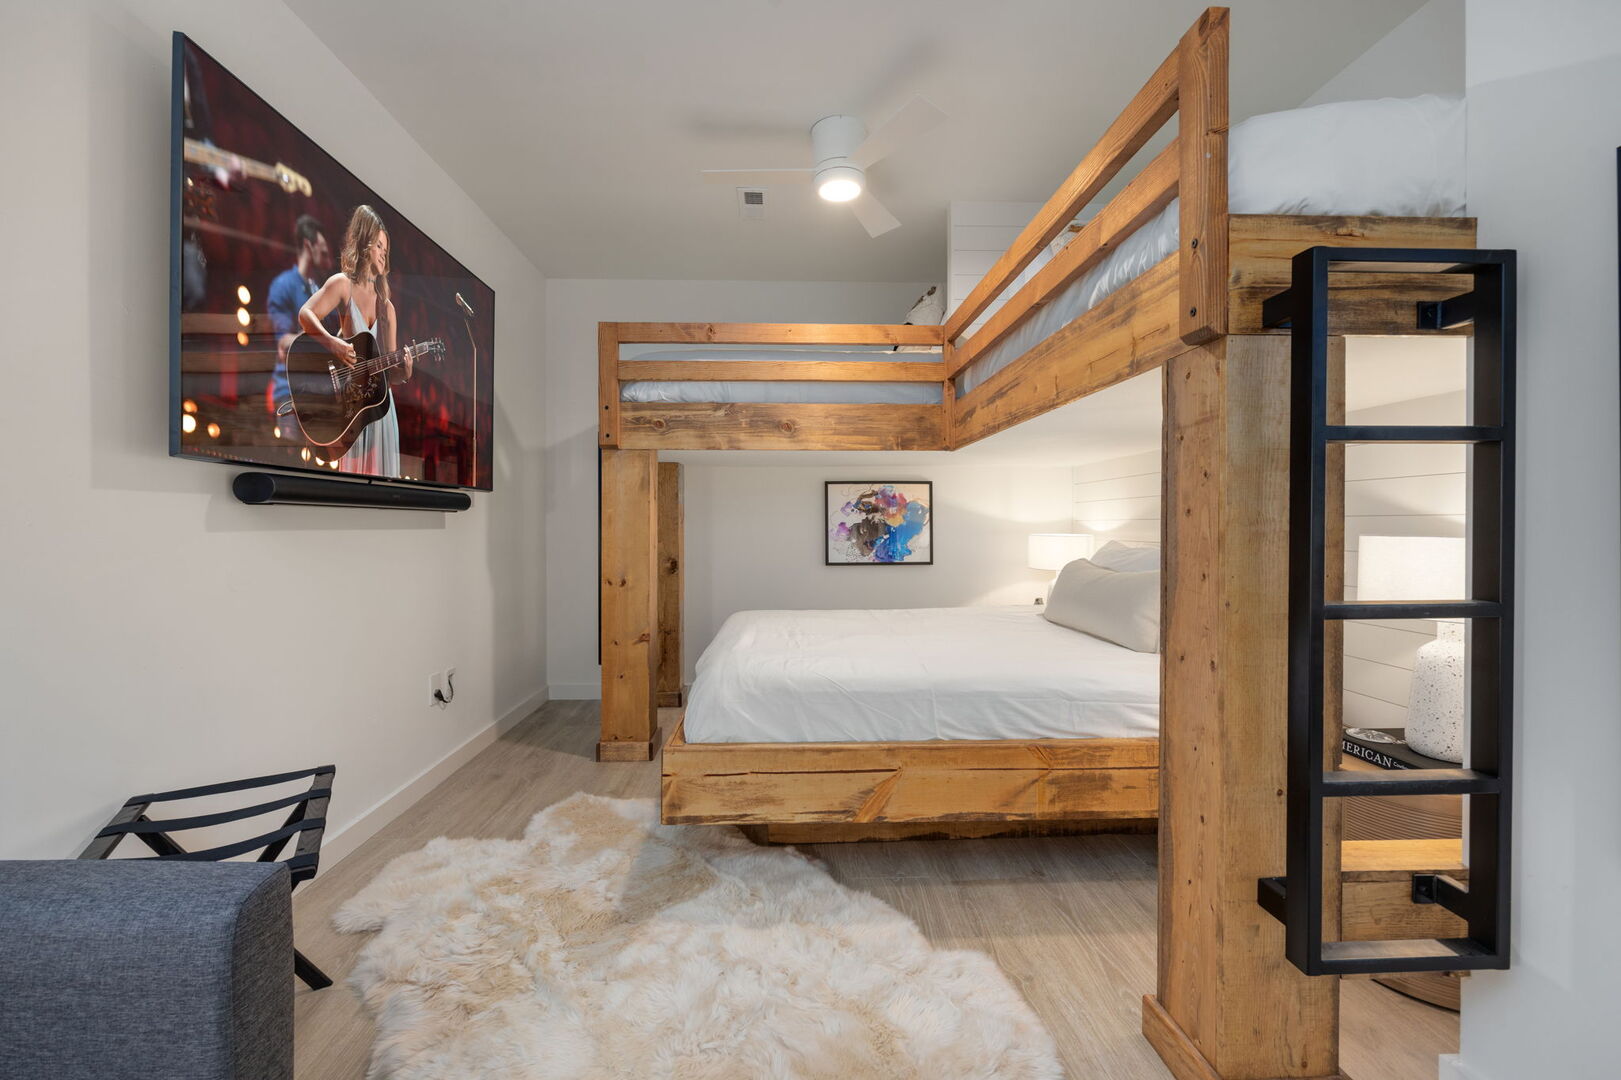 Main Level: 4th bedroom with 2 Twins over 1 Queen bed (bunk bed style), smart TV, and 1 Twin size sleeper sofa.